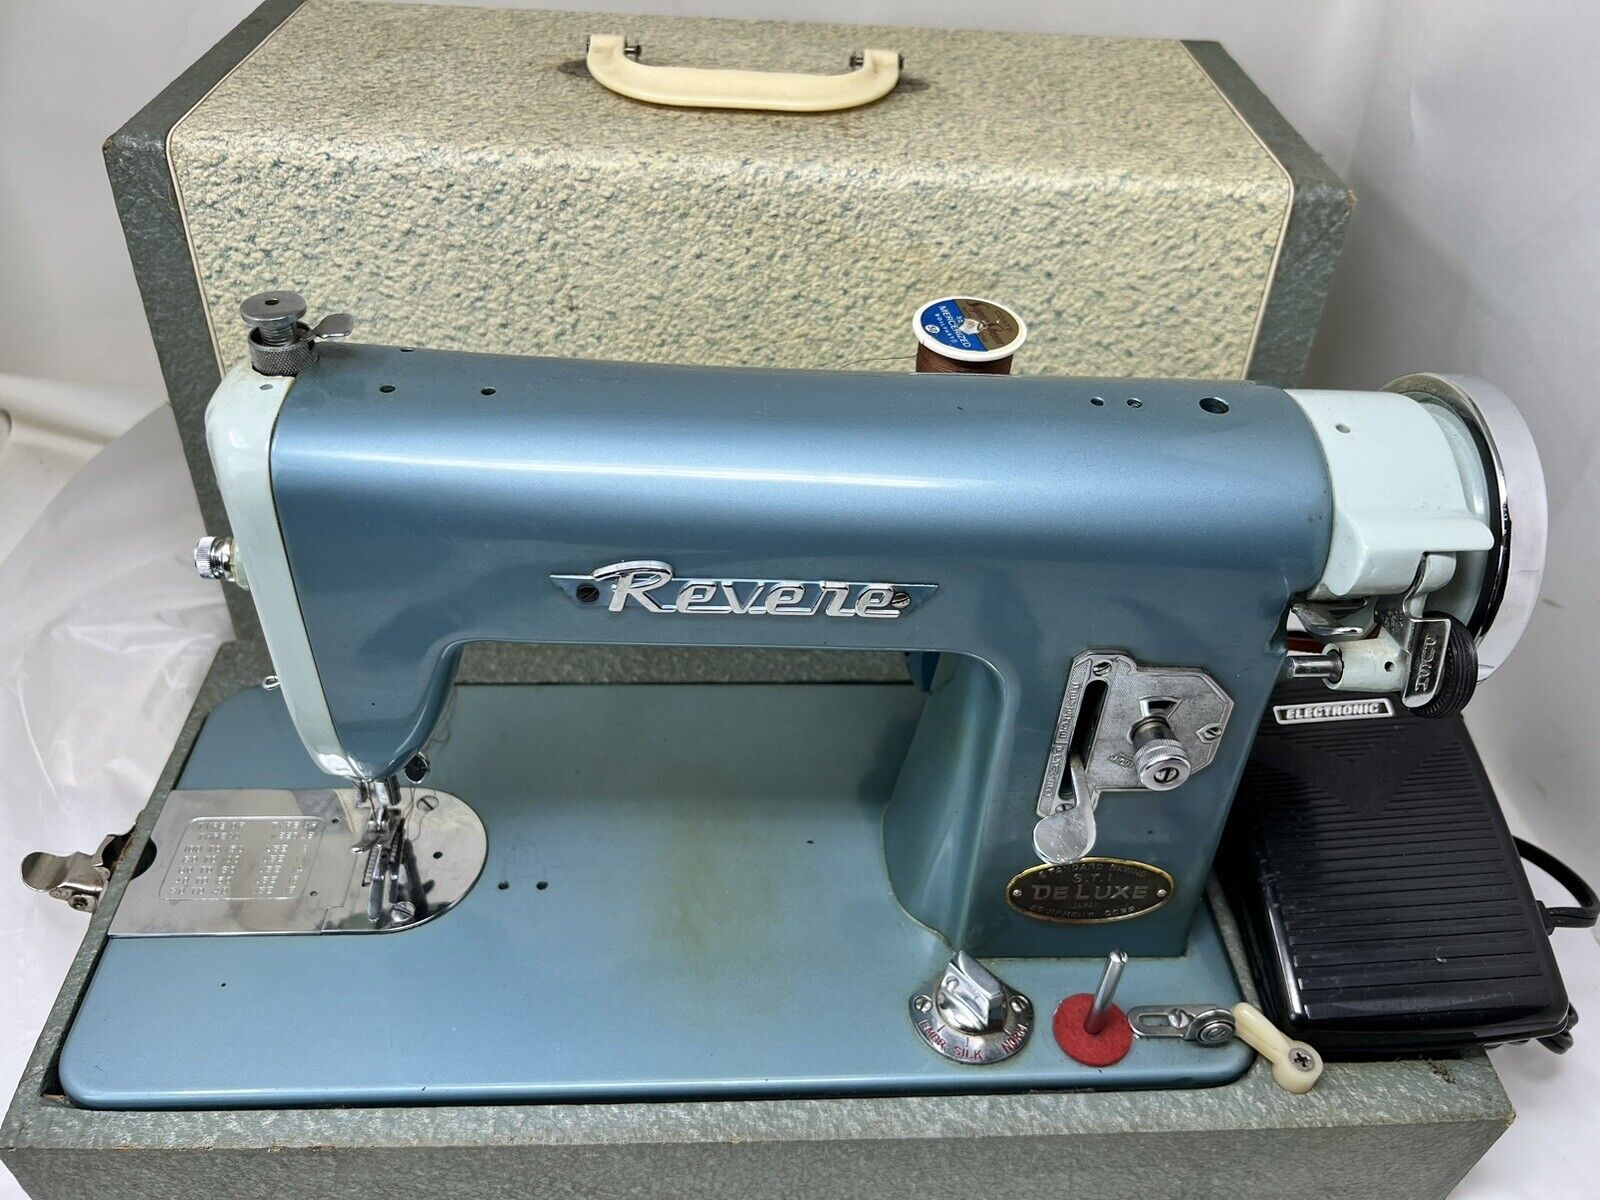 Vintage 1950s Revere Precision Super DeLuxe Sewing Machine With Case